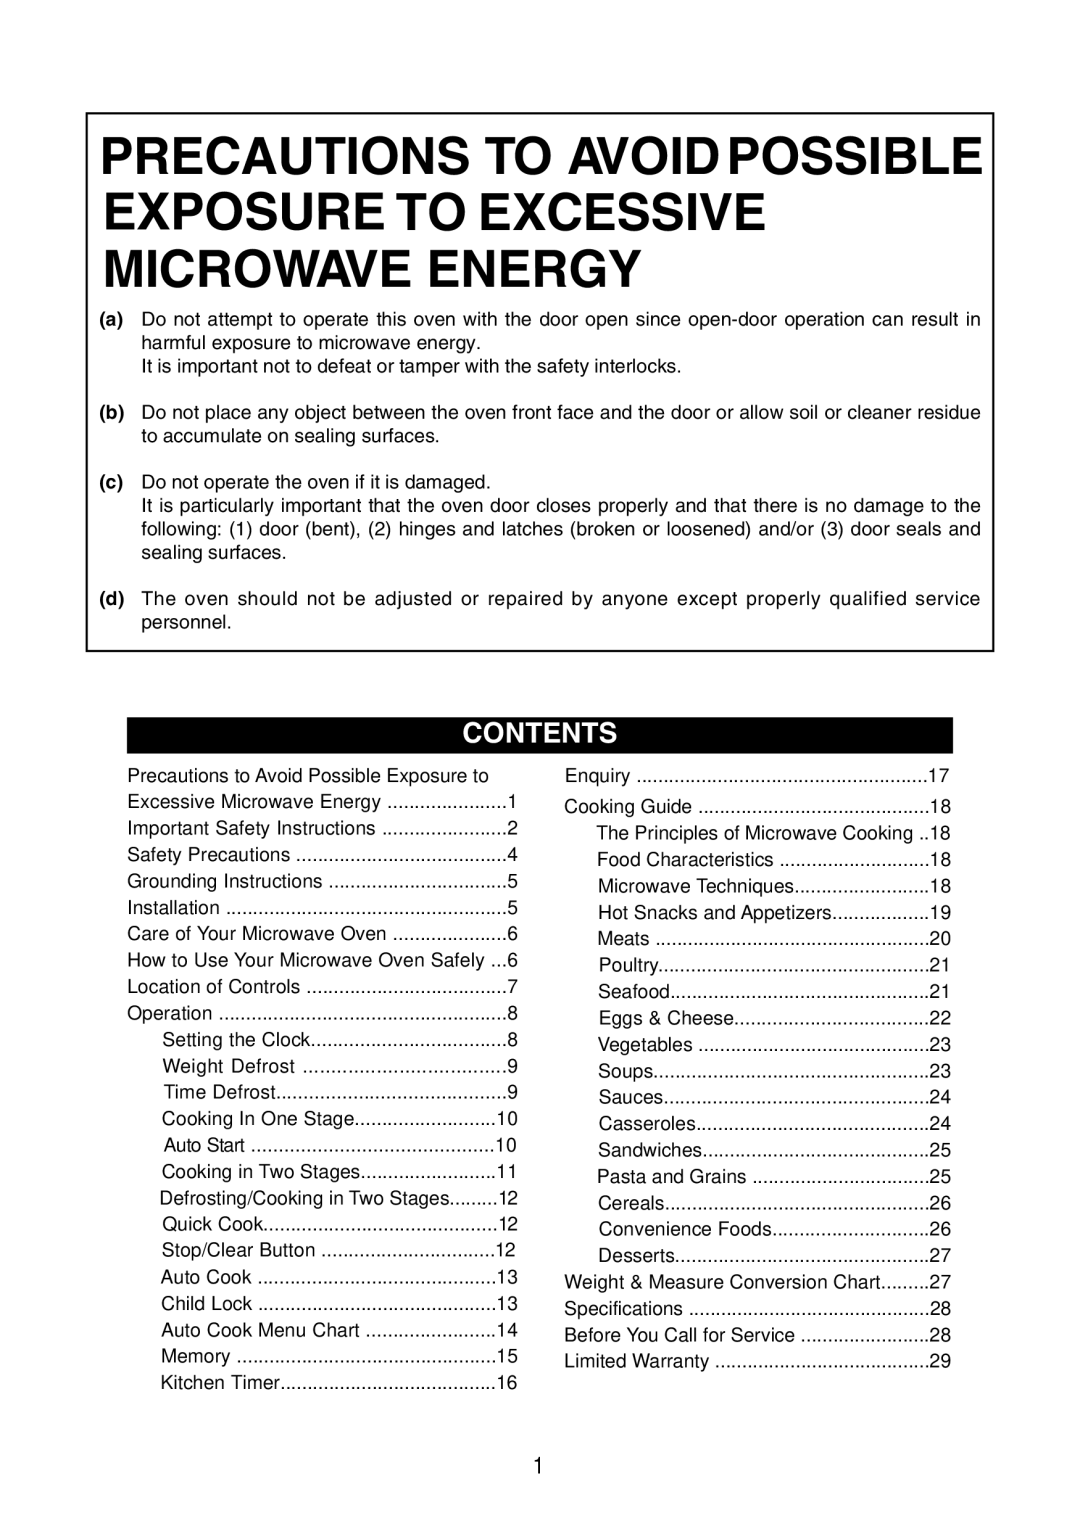 Emerson MW8115SS owner manual Contents, Precautions To Avoid Possible Exposure To Excessive Microwave Energy 